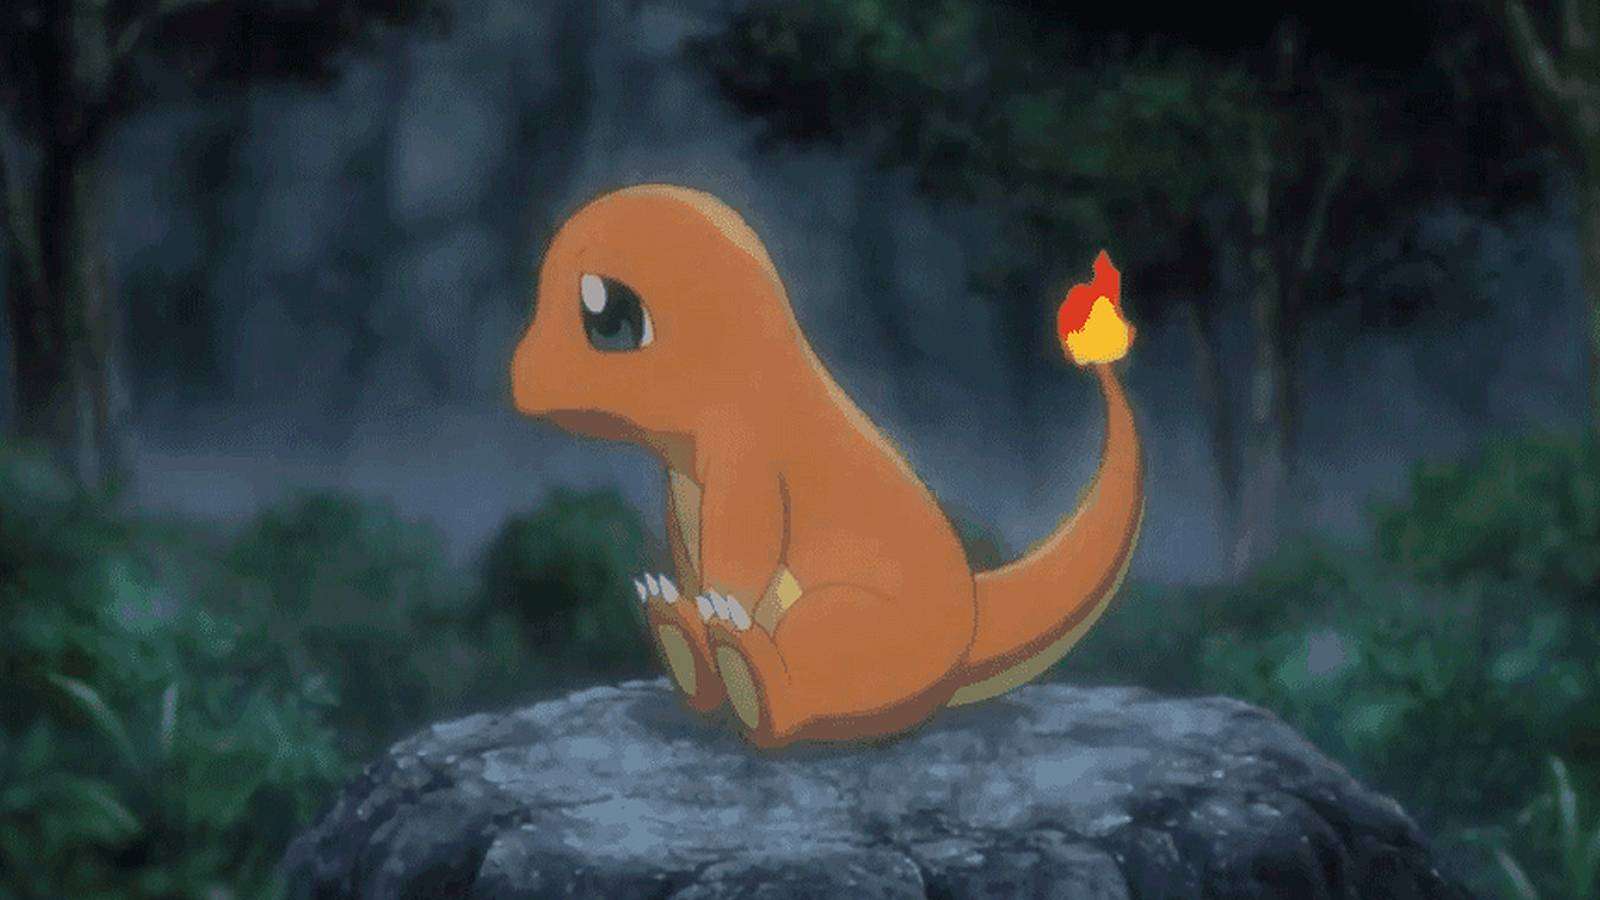 A screenshot from the movie Pokemon: I Choose You! shows a Charmander waiting on a rock in the rain